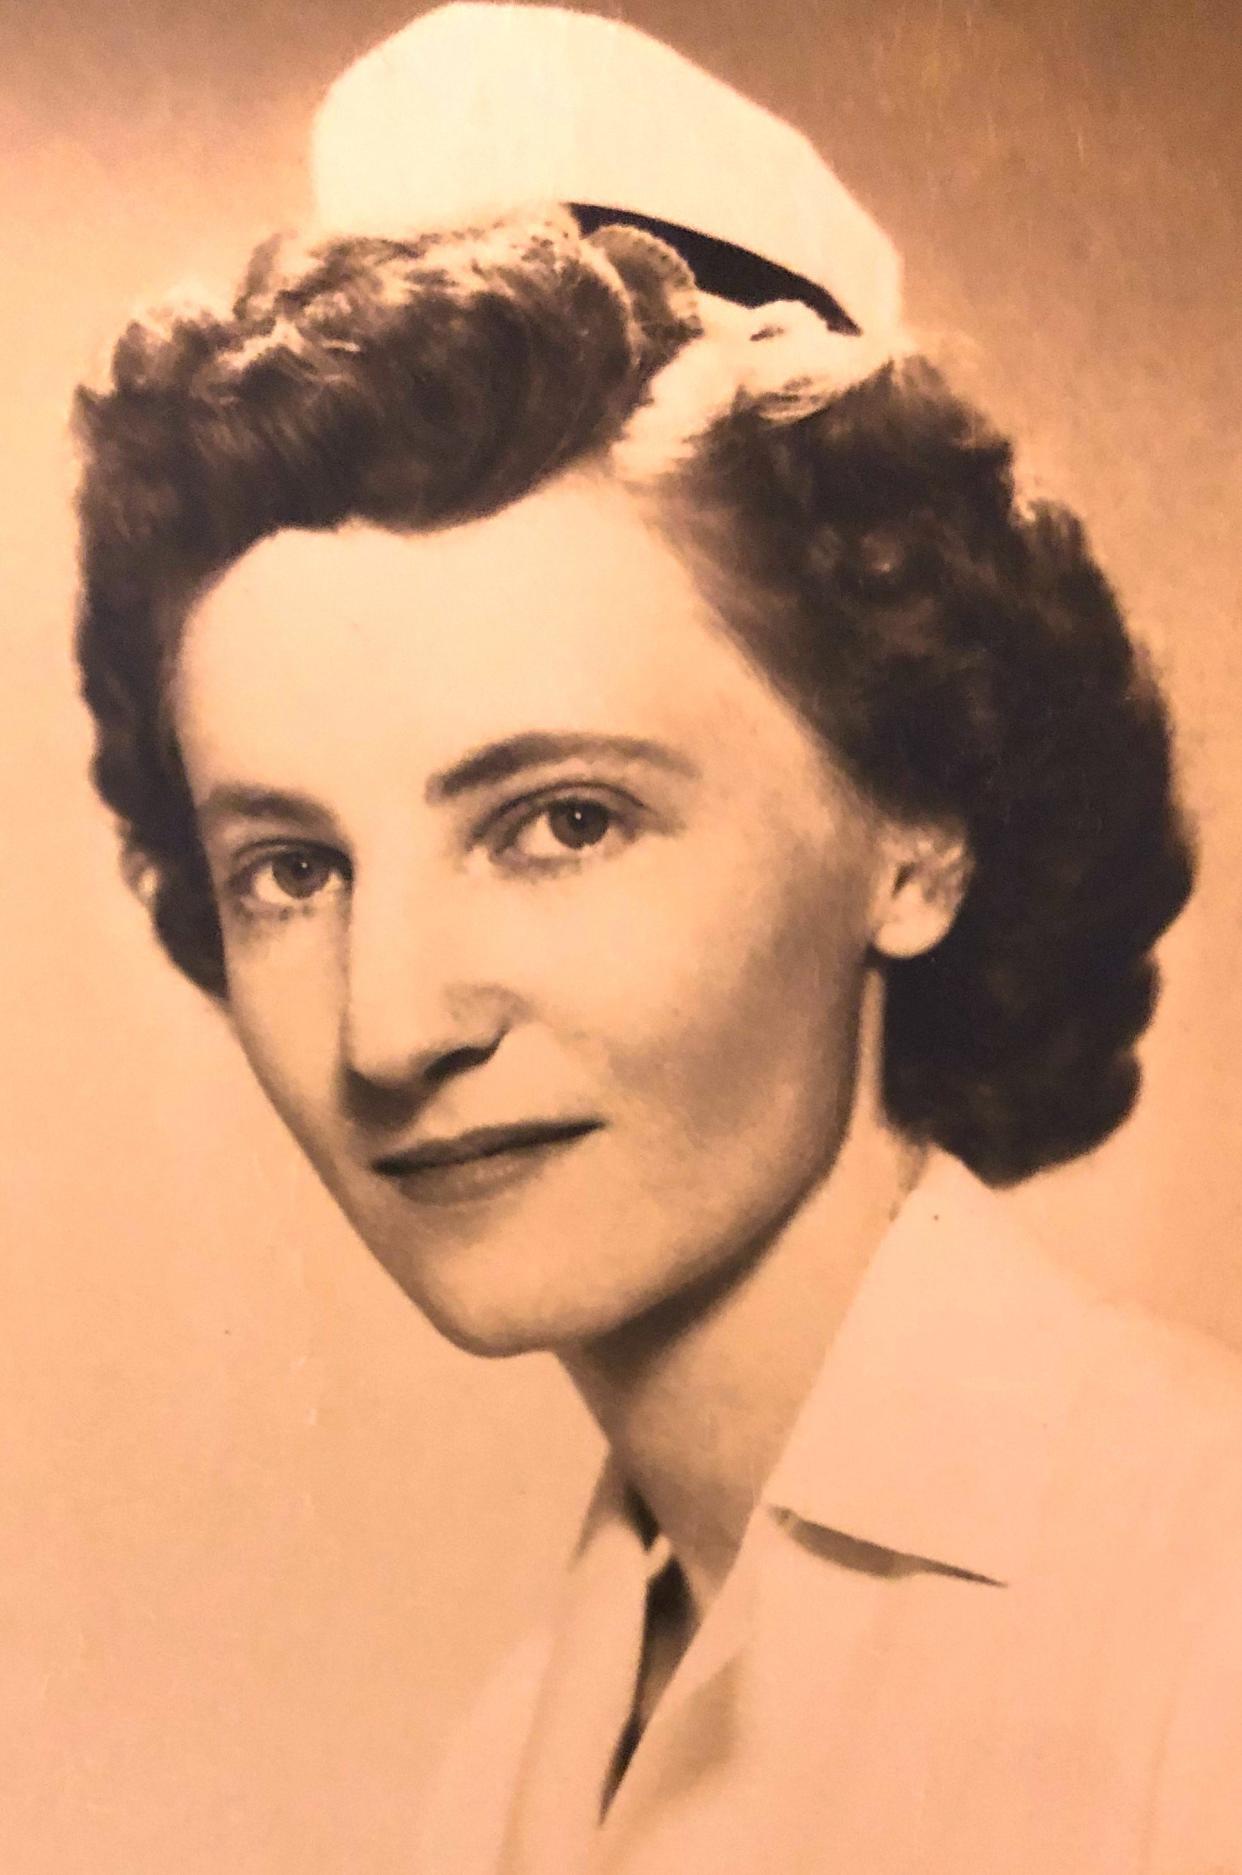 Betty Beecher of Weymouth in the 1940s when she graduated from nursing school, as a member of the U.S. Cadet Nurse Corps, and became an R.N.